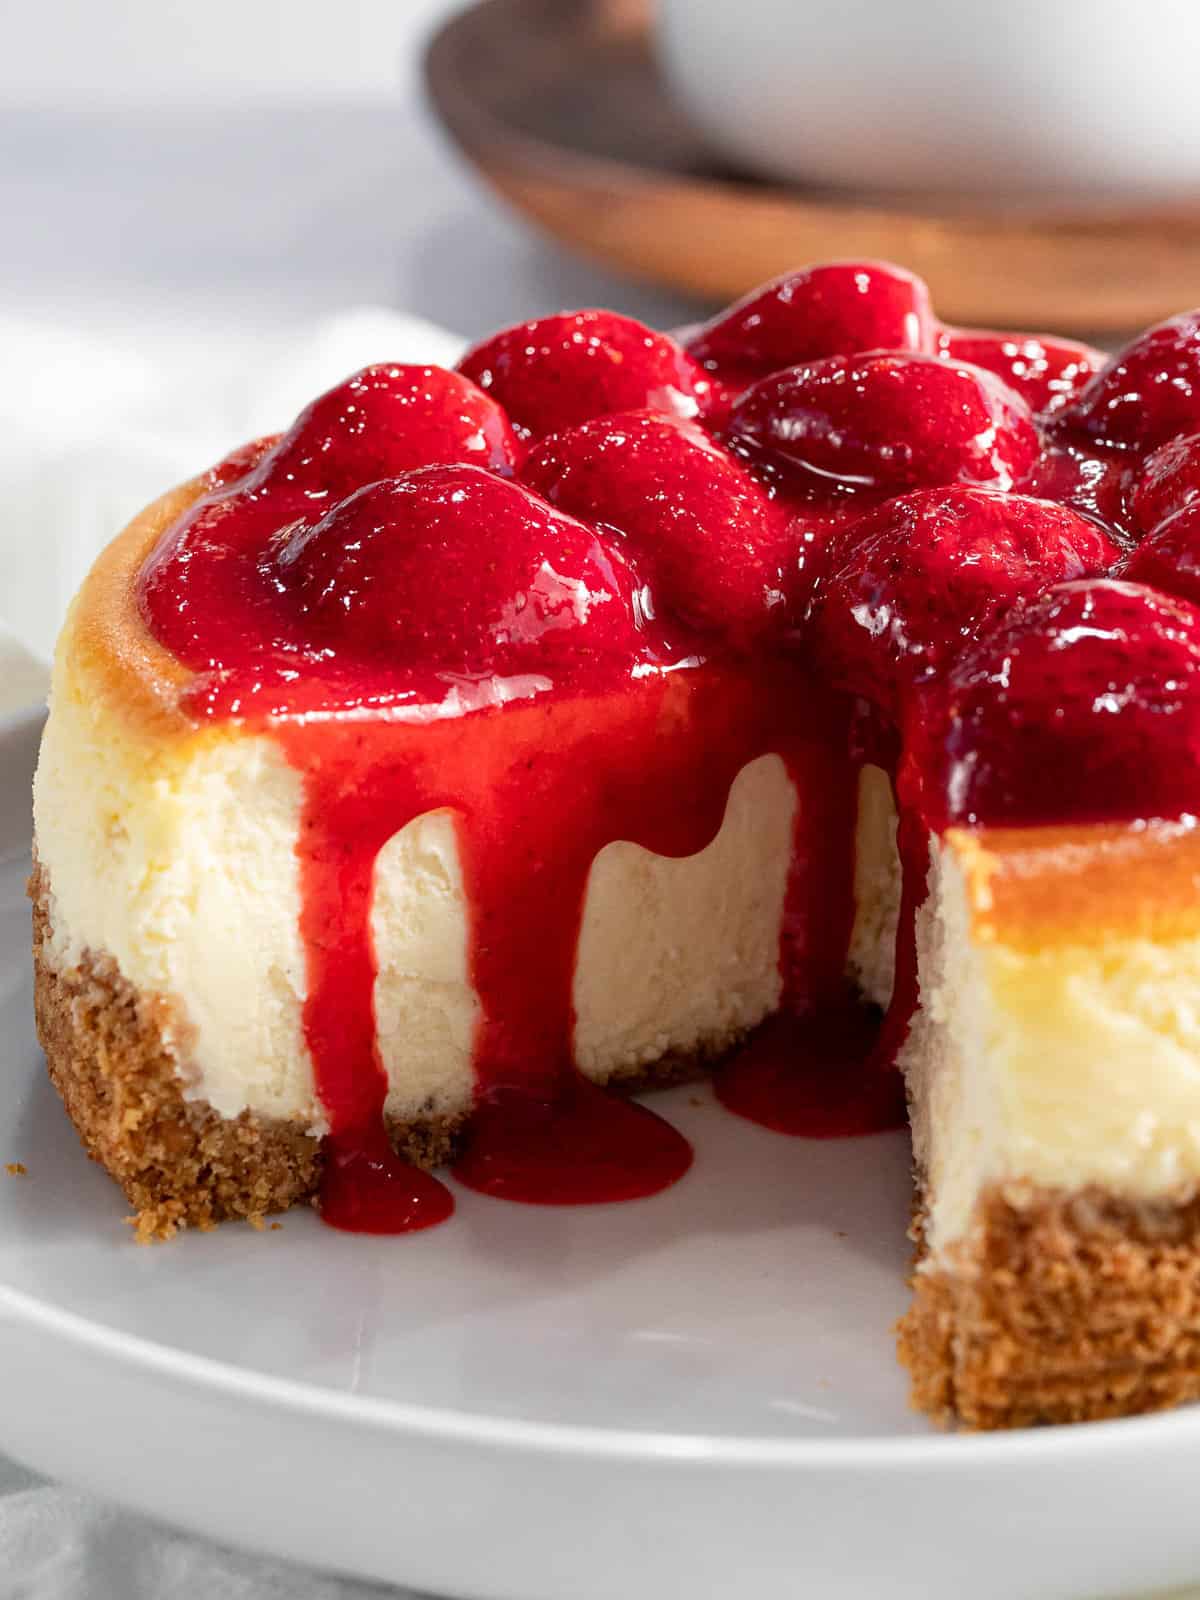 Strawberry sauce is used to glaze the top of cheesecake.